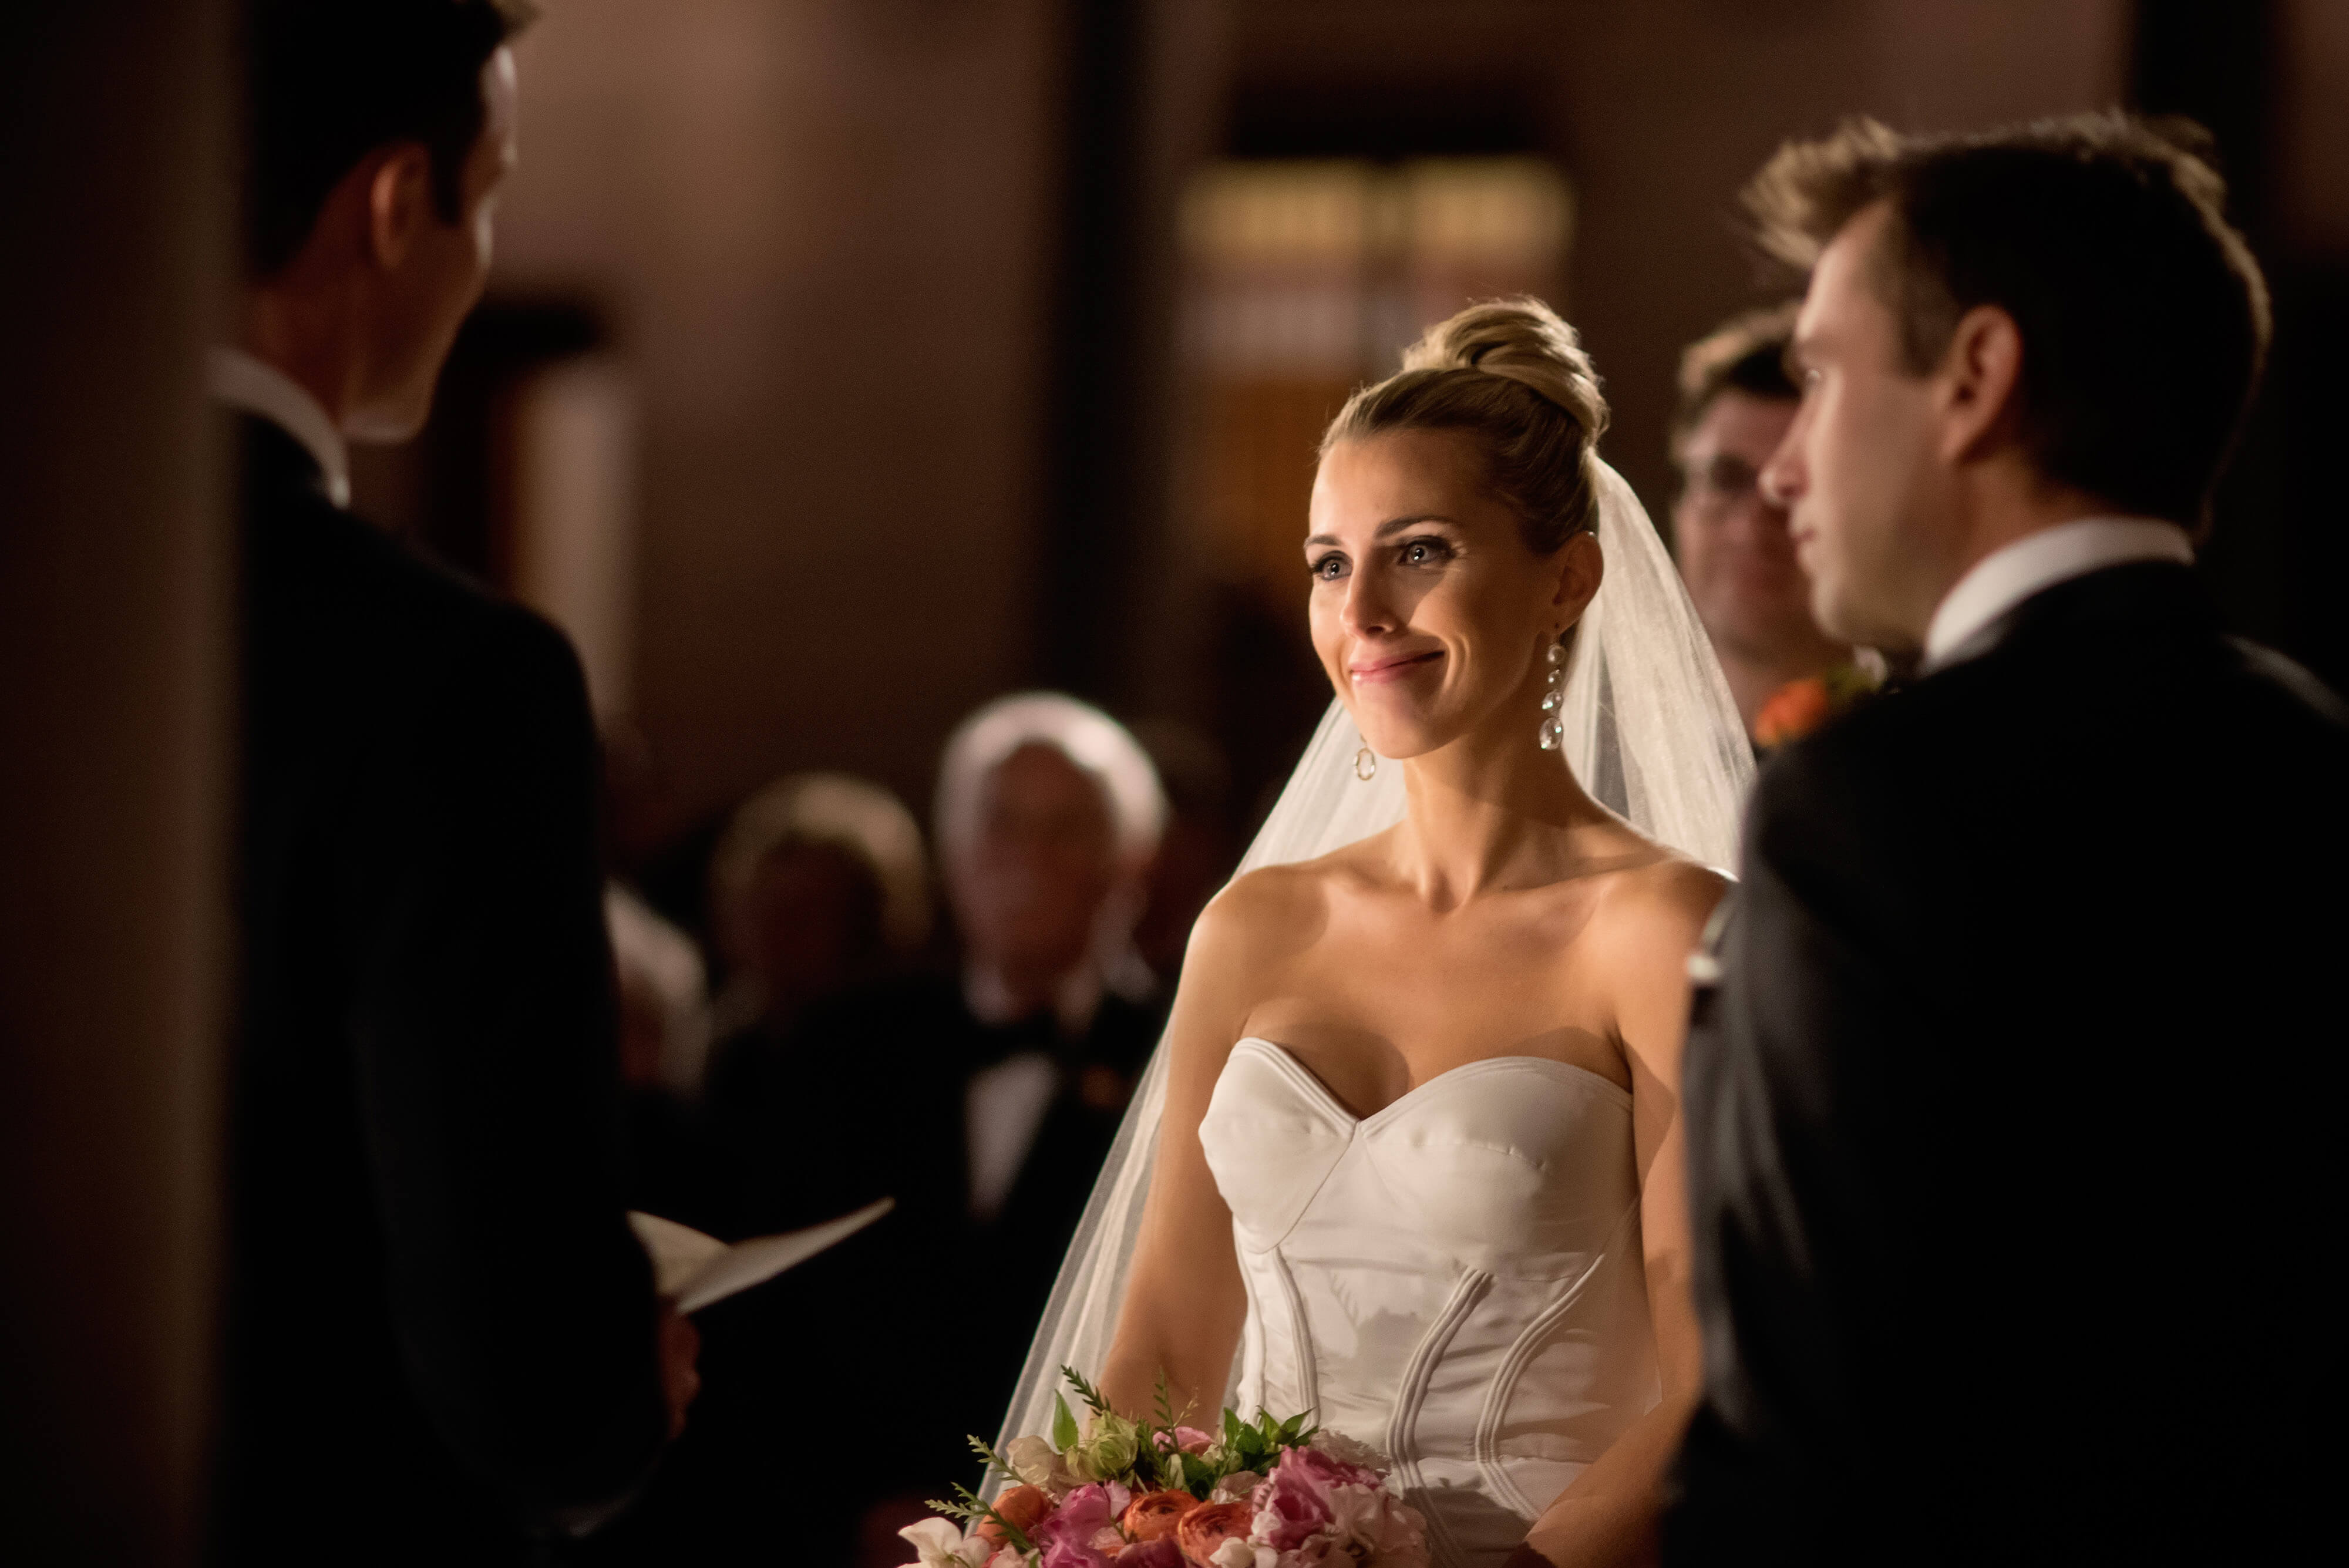 bride looking at groom during boston public library wedding in courtyard at night